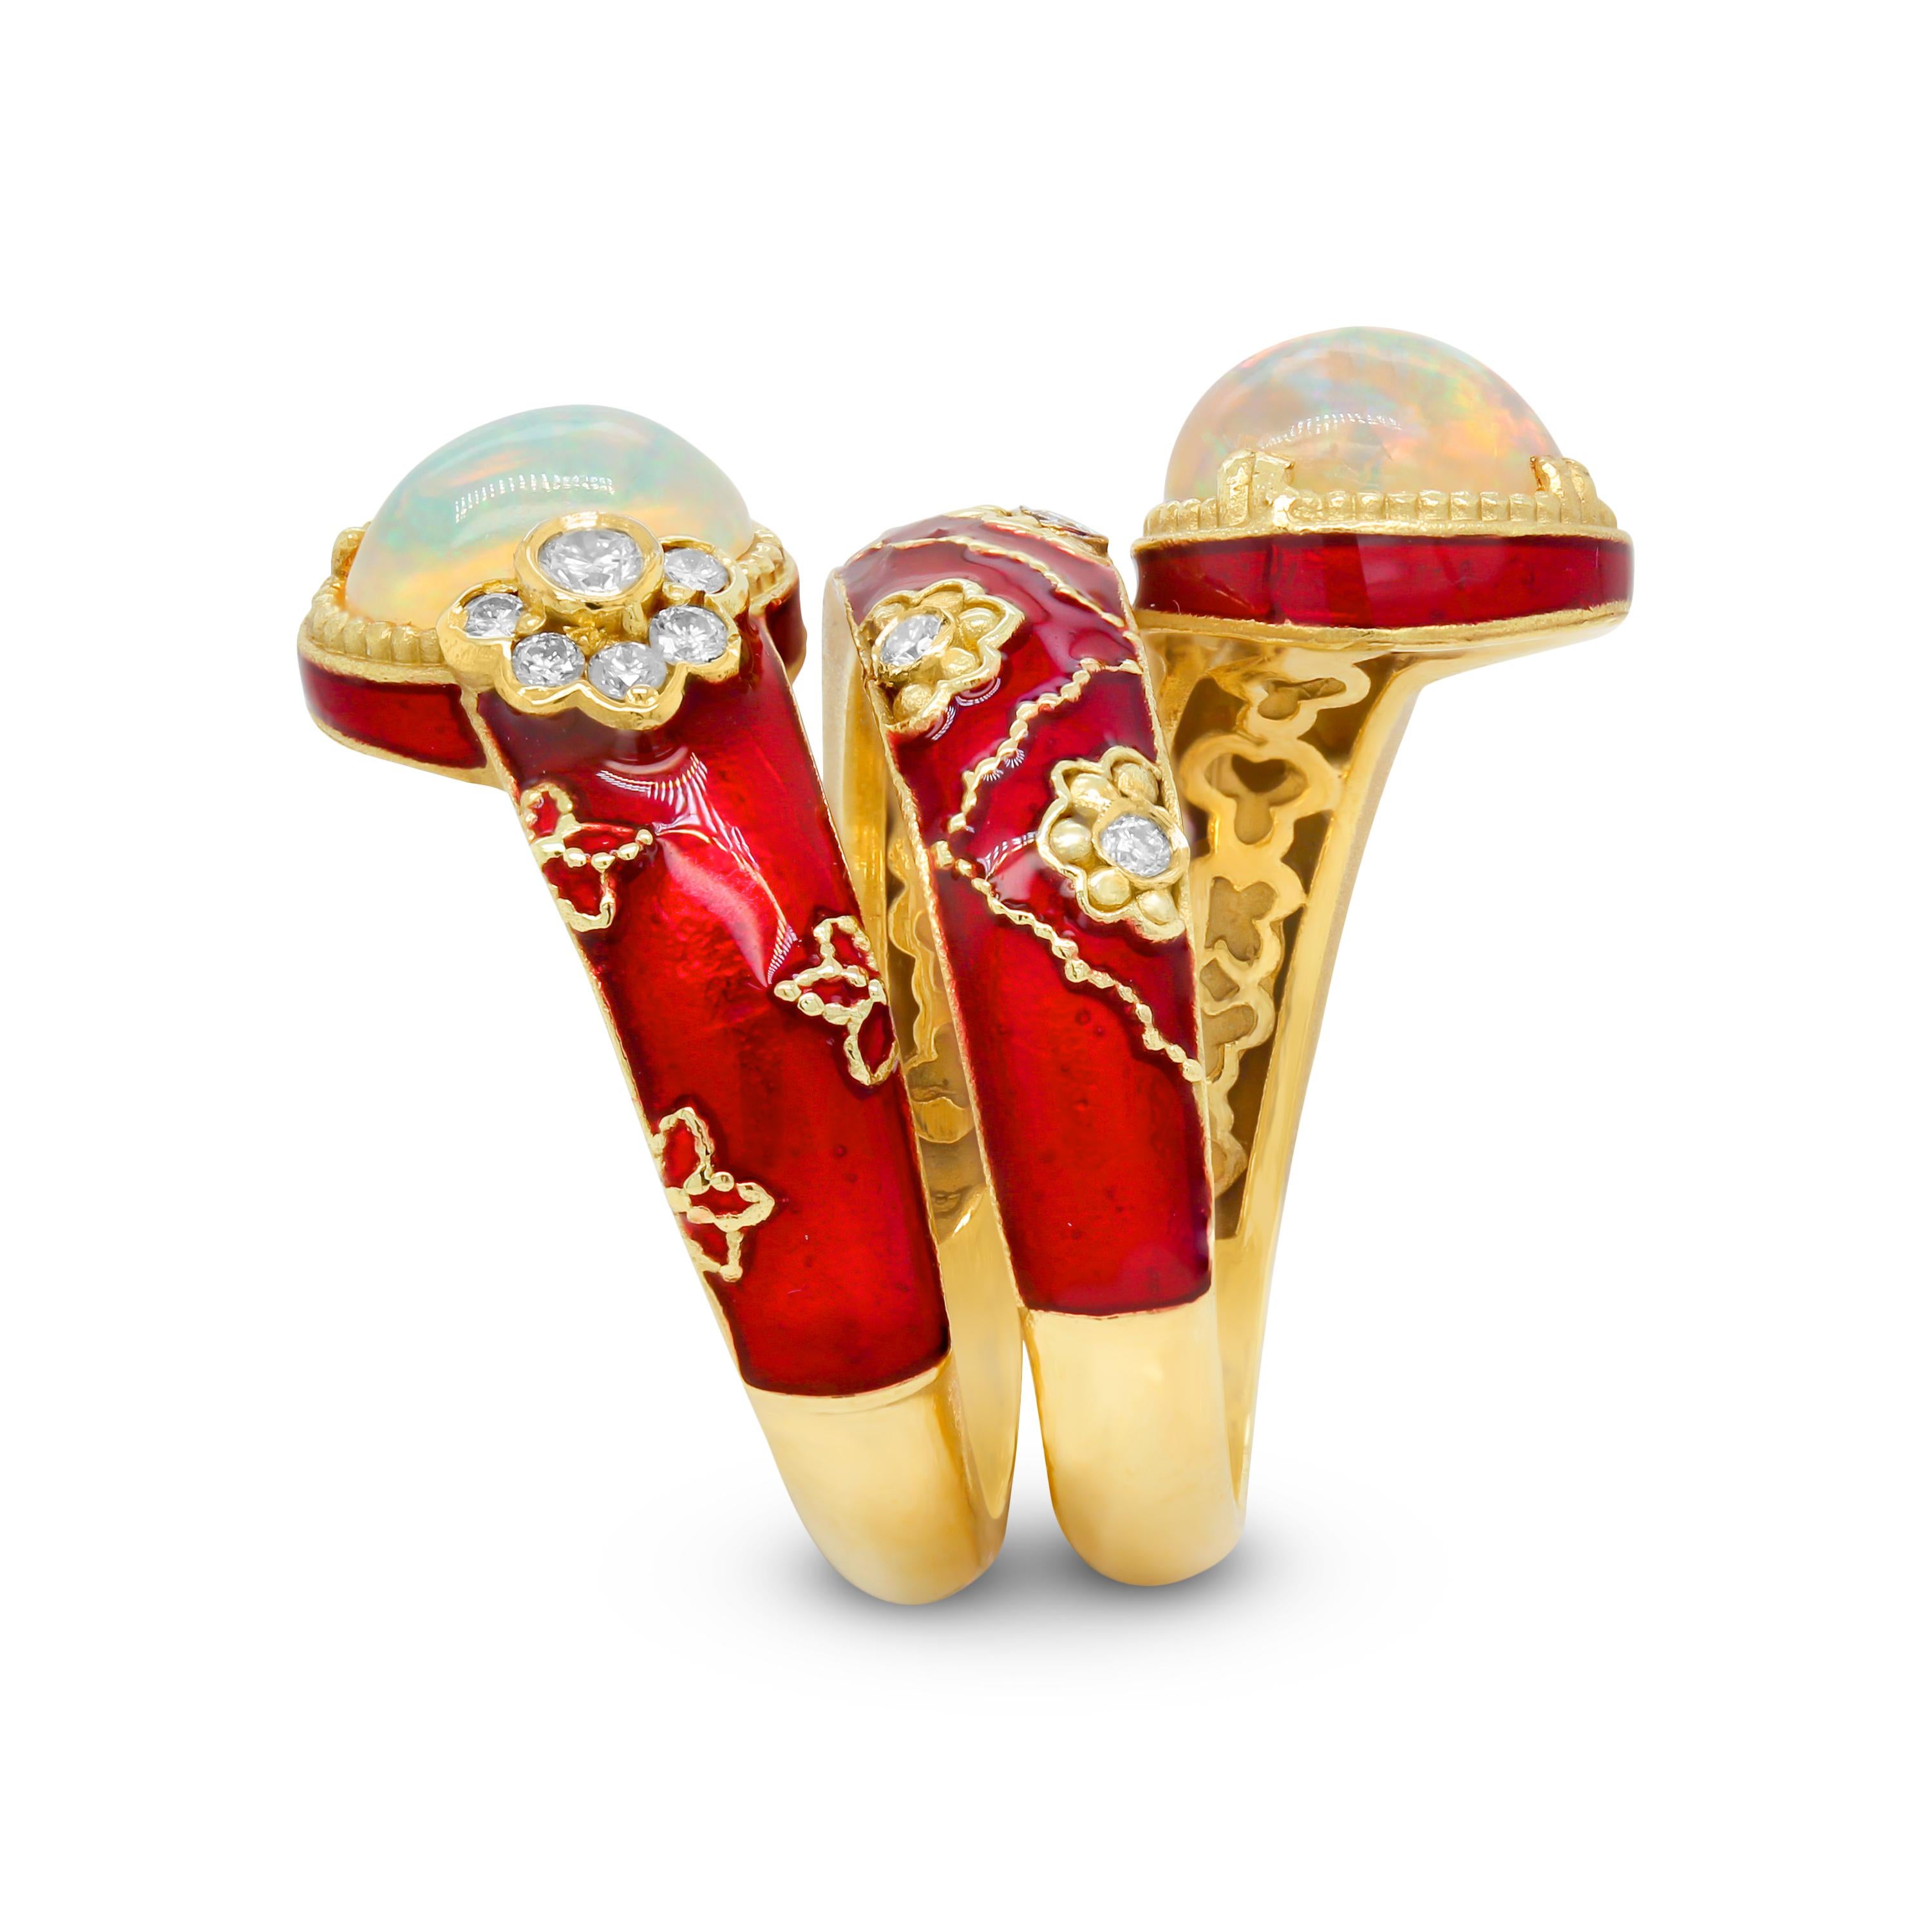 Stambolian 18K Gold Red Enamel Diamonds Ethiopian Opals Twisted Spiral Wide Ring

From the Stambolian 